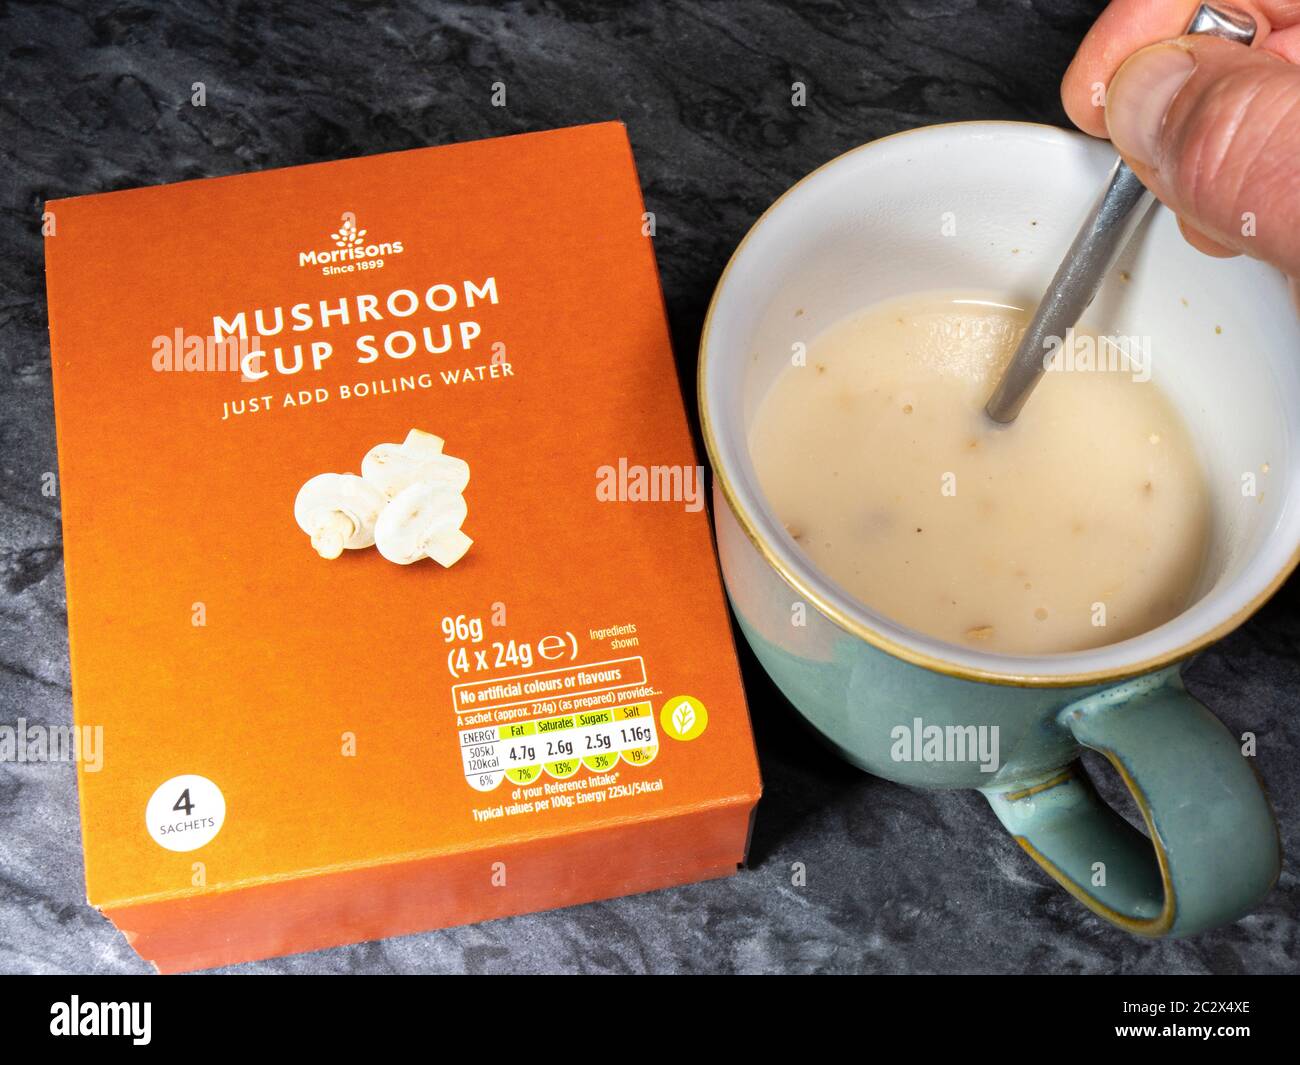 Morrisons own brand mushroom soup – a product box and a sachet of dry soup mixed with with boiling water, being stirred in a cup. Stock Photo